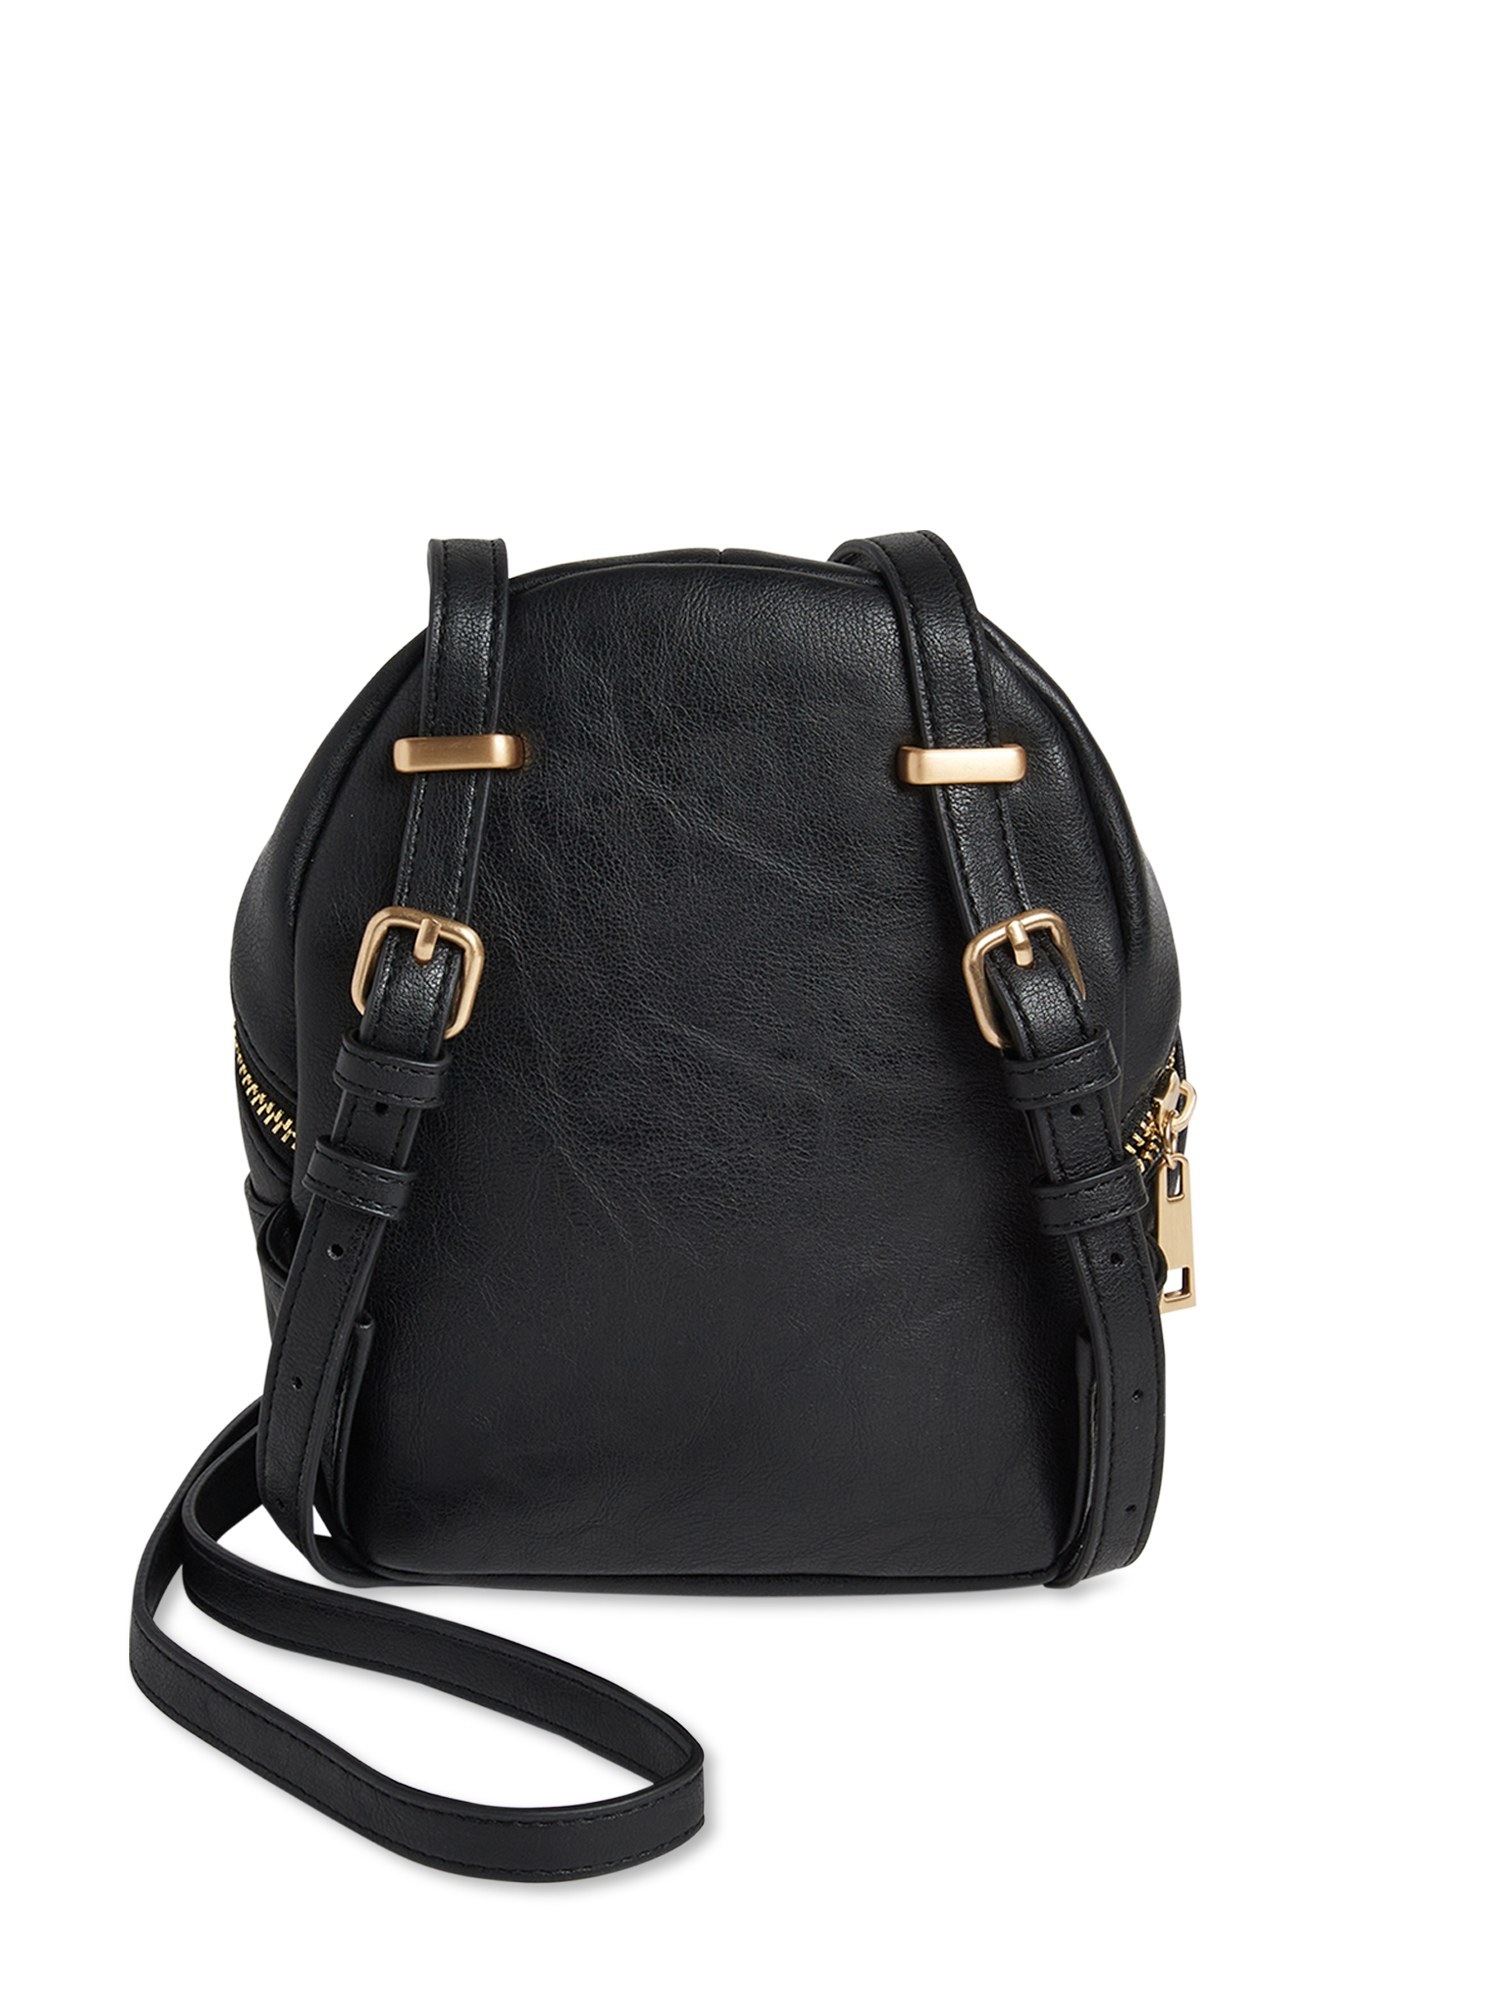 French Connection PERRY MINI CONVERTIBLE BACKPACK/ CROSSBODY 1 L Small  Backpack BLACK - Price in India